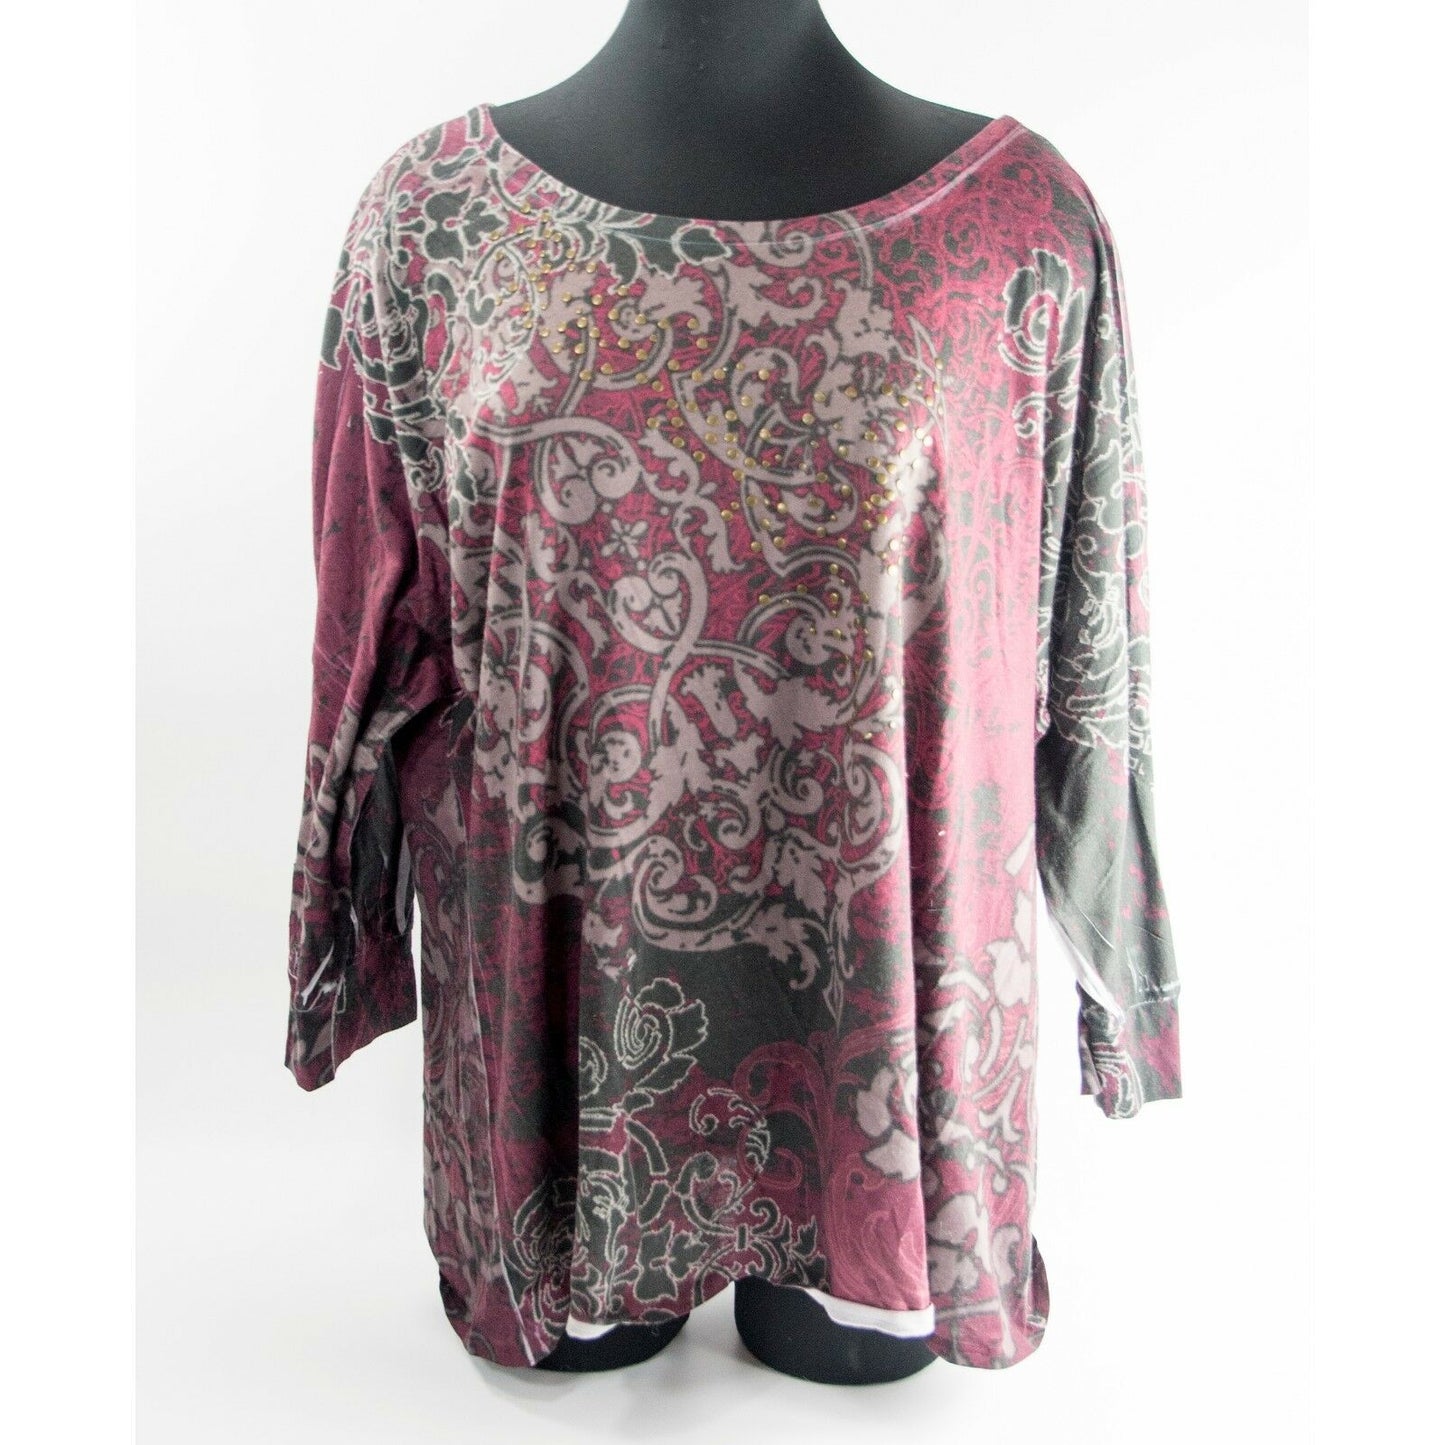 Avenue Wine Grey Swirl Floral Graphic Studded Long Sleeve Knit Shirt 18 20 Plus